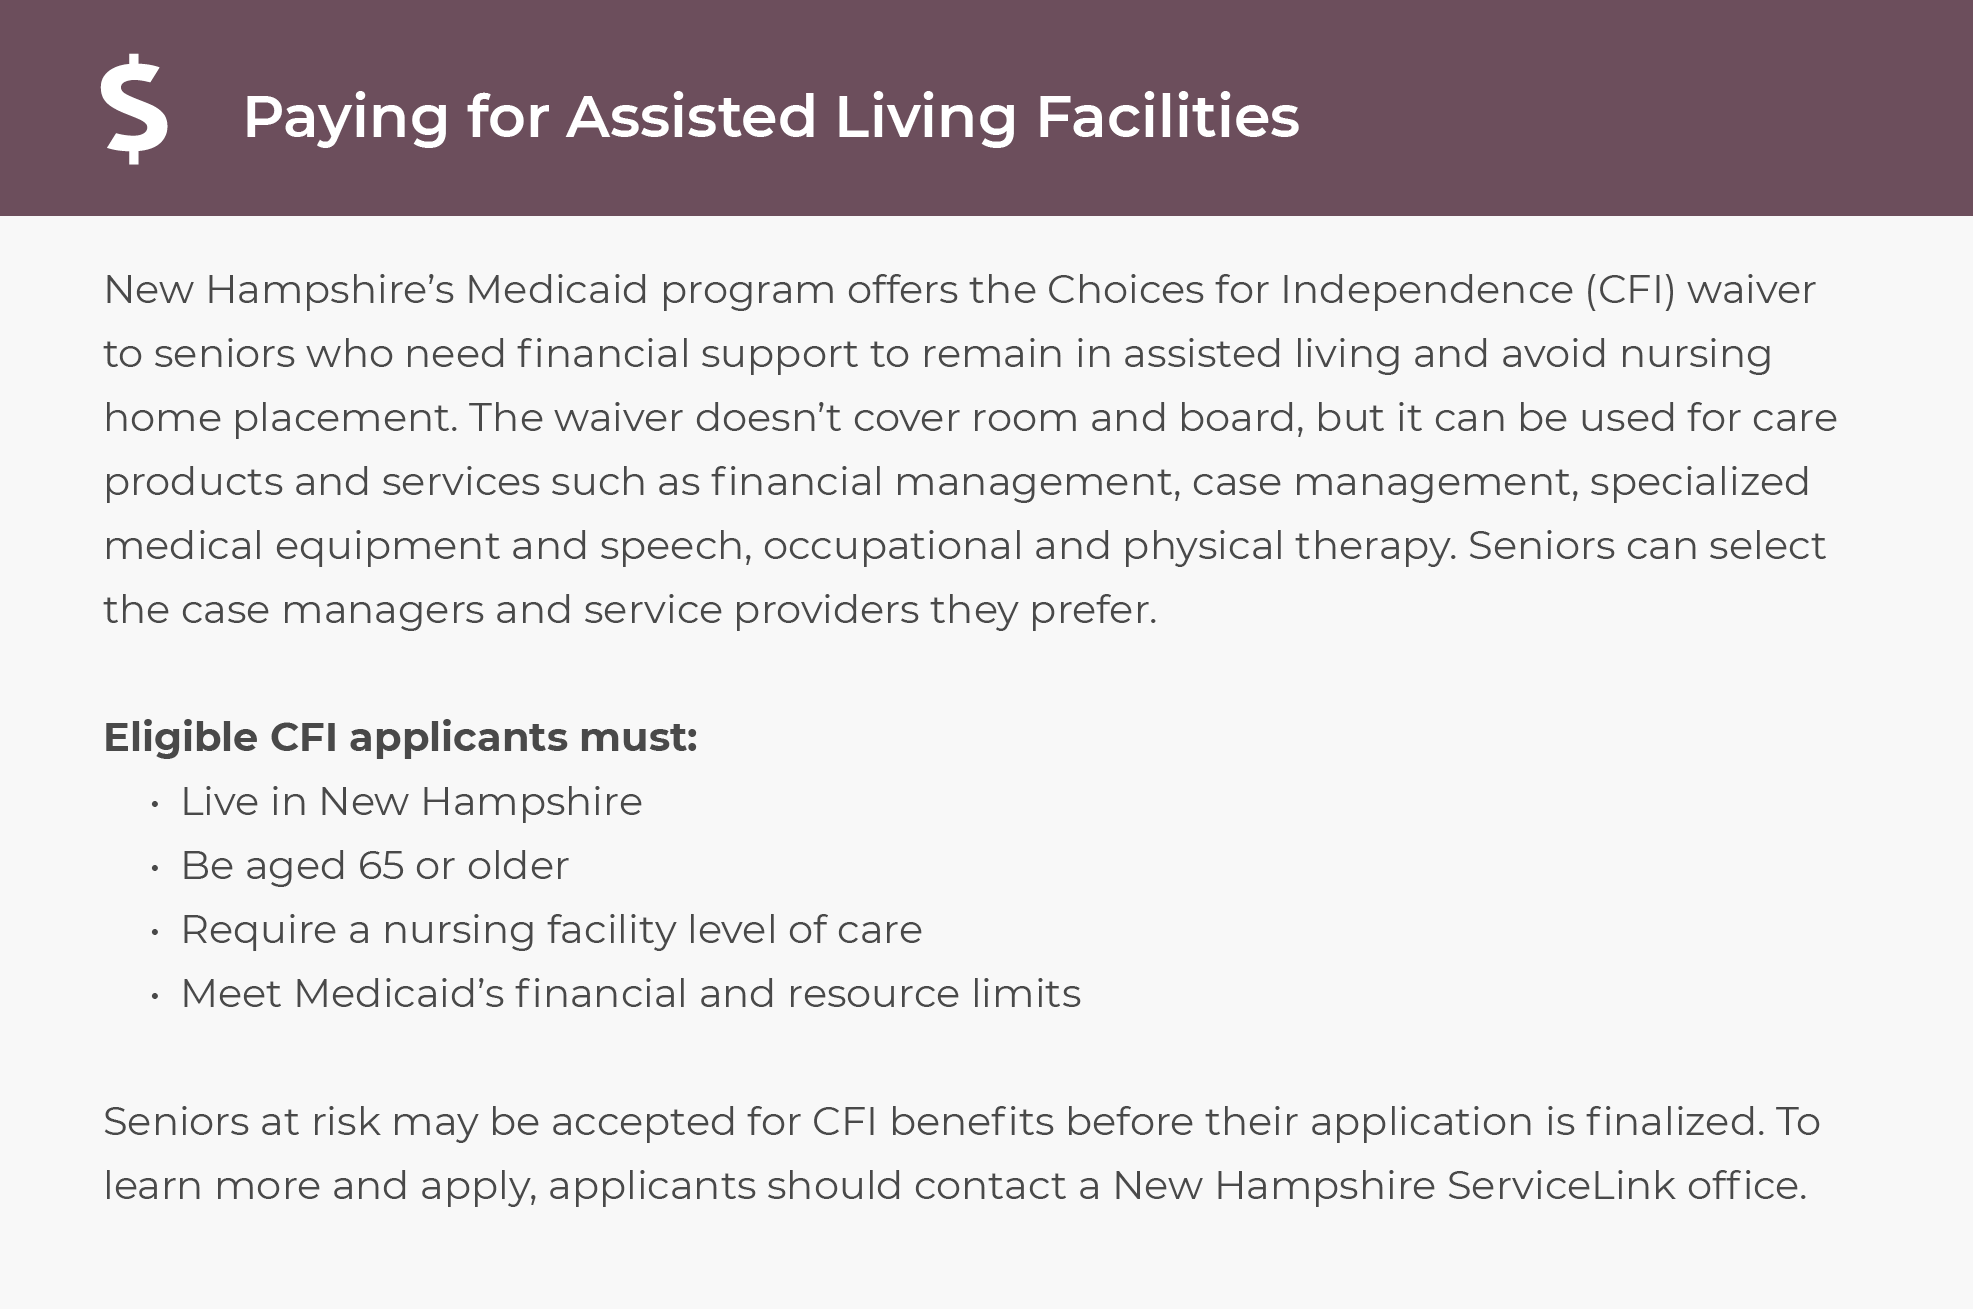 How to Get Financial Assistance for Assisted Living in New Hampshire